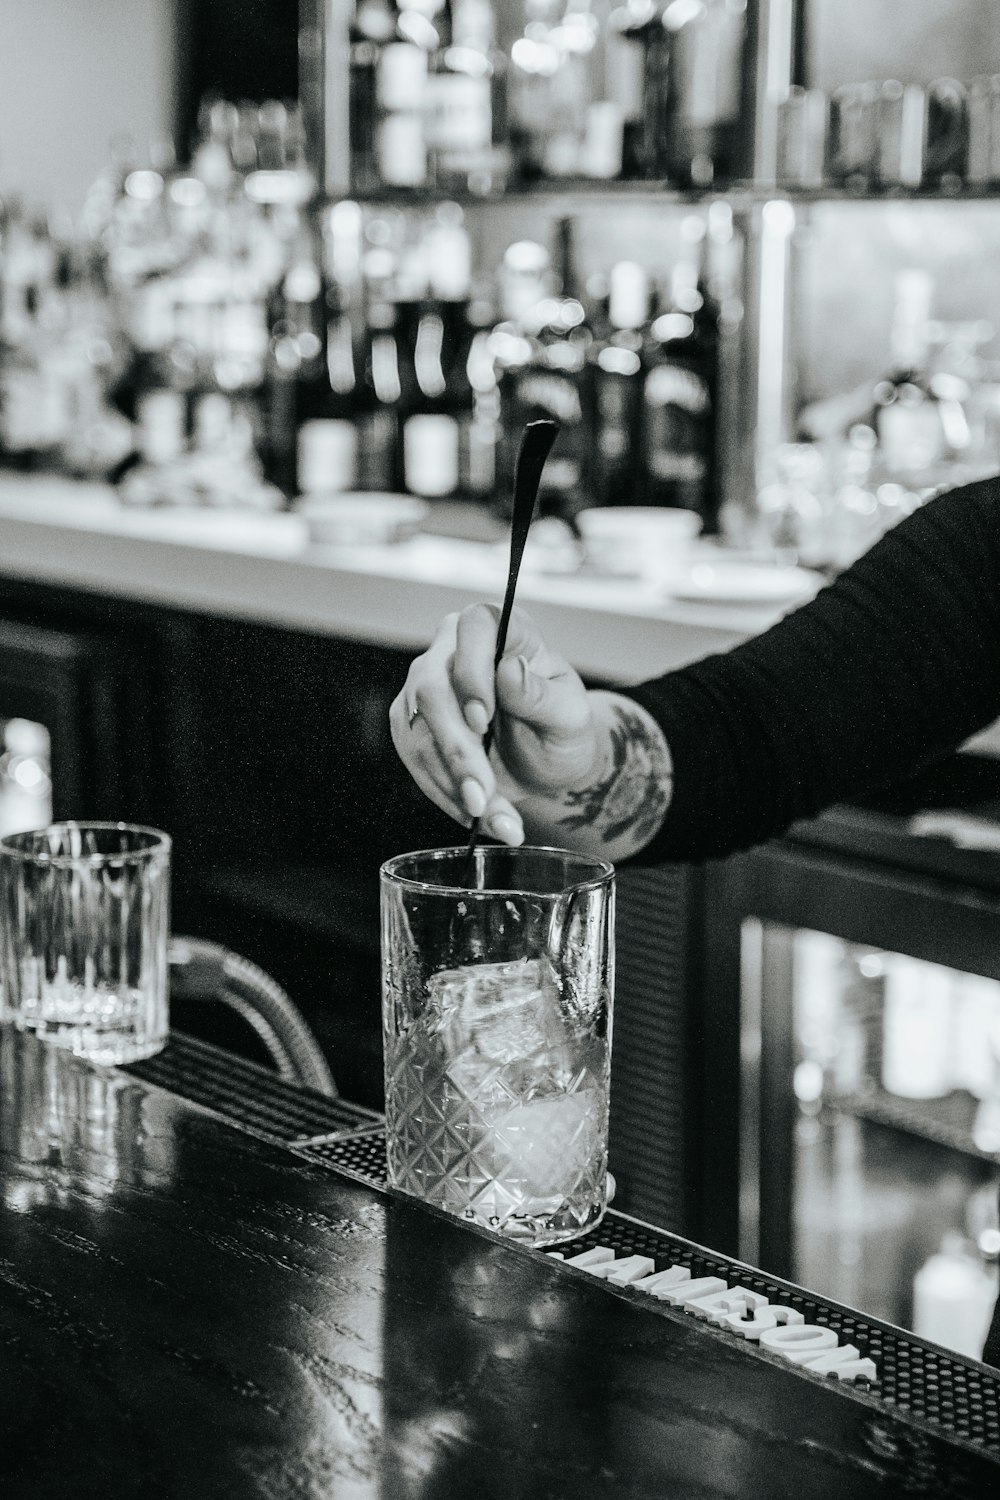 a person holding a spoon in a glass on a bar